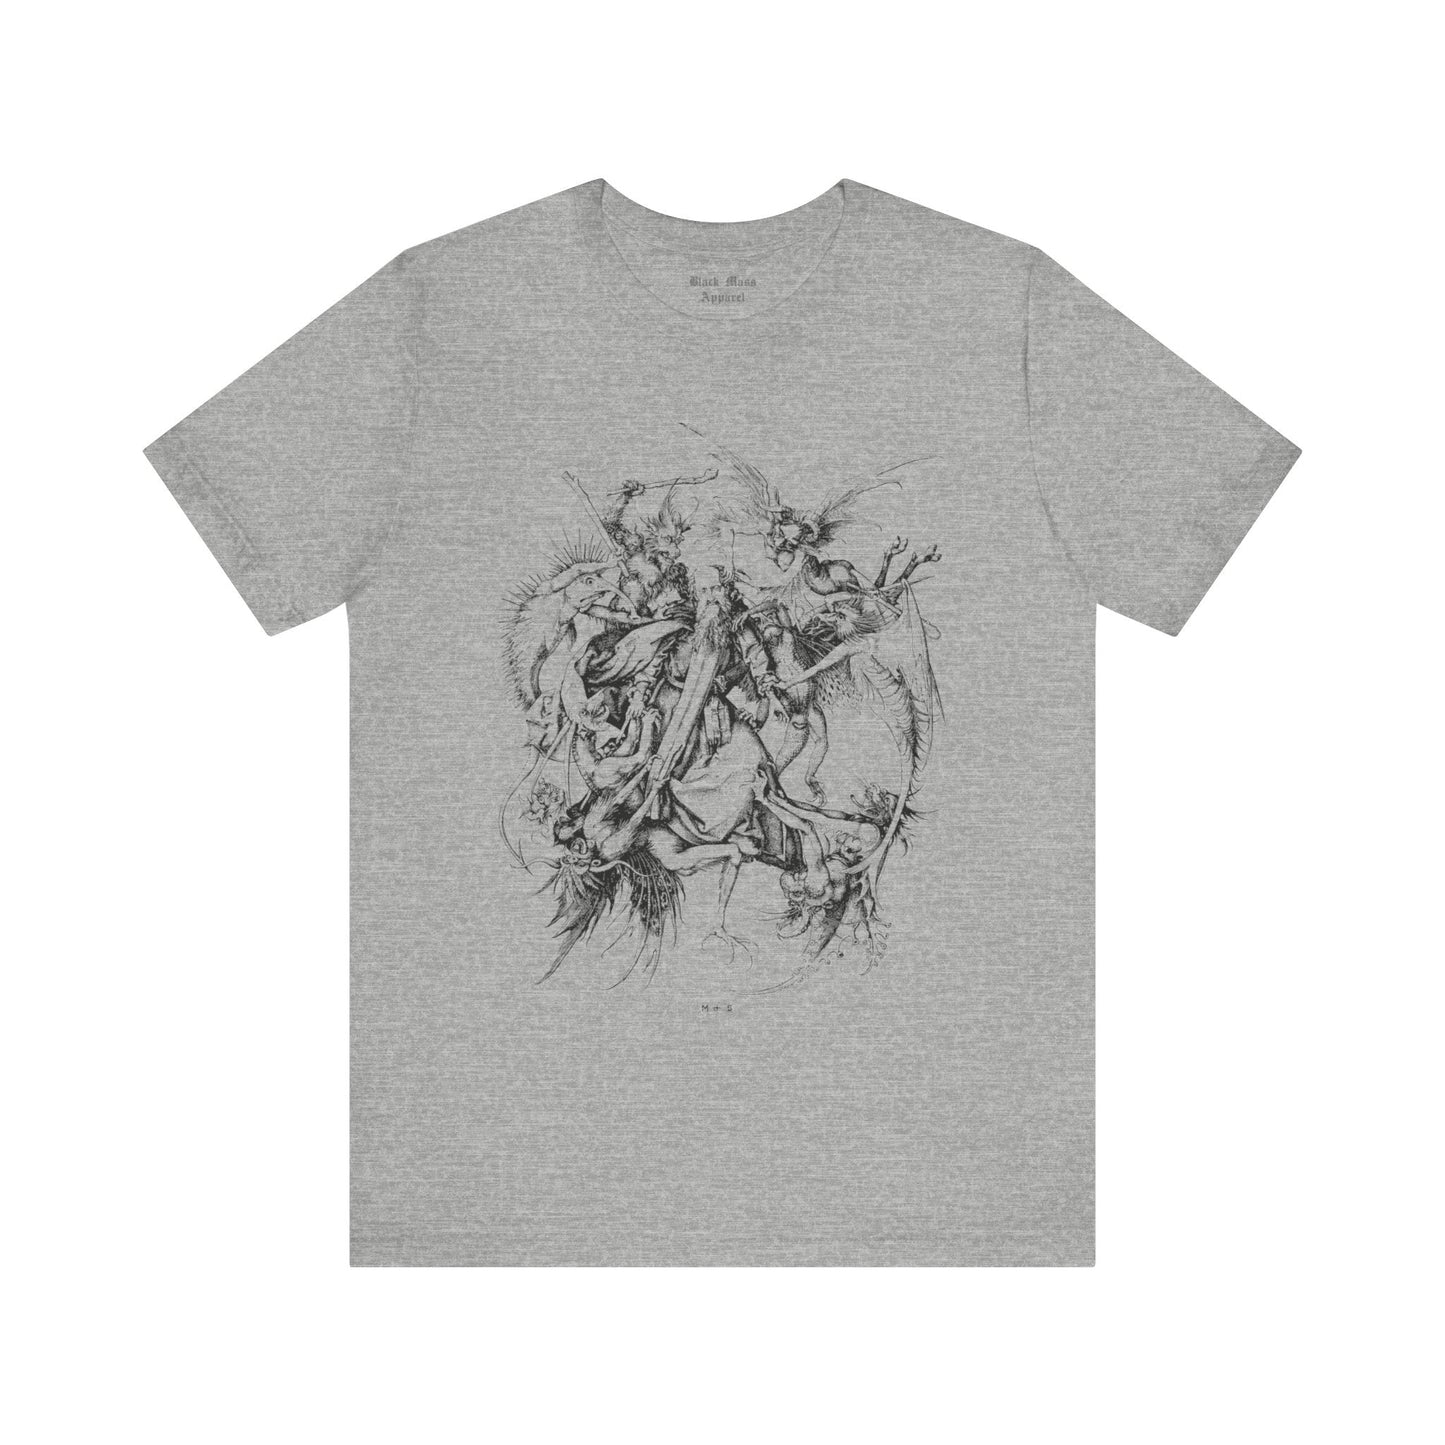 Saint Anthony Tormented by Demons - Black Mass Apparel - T - Shirt